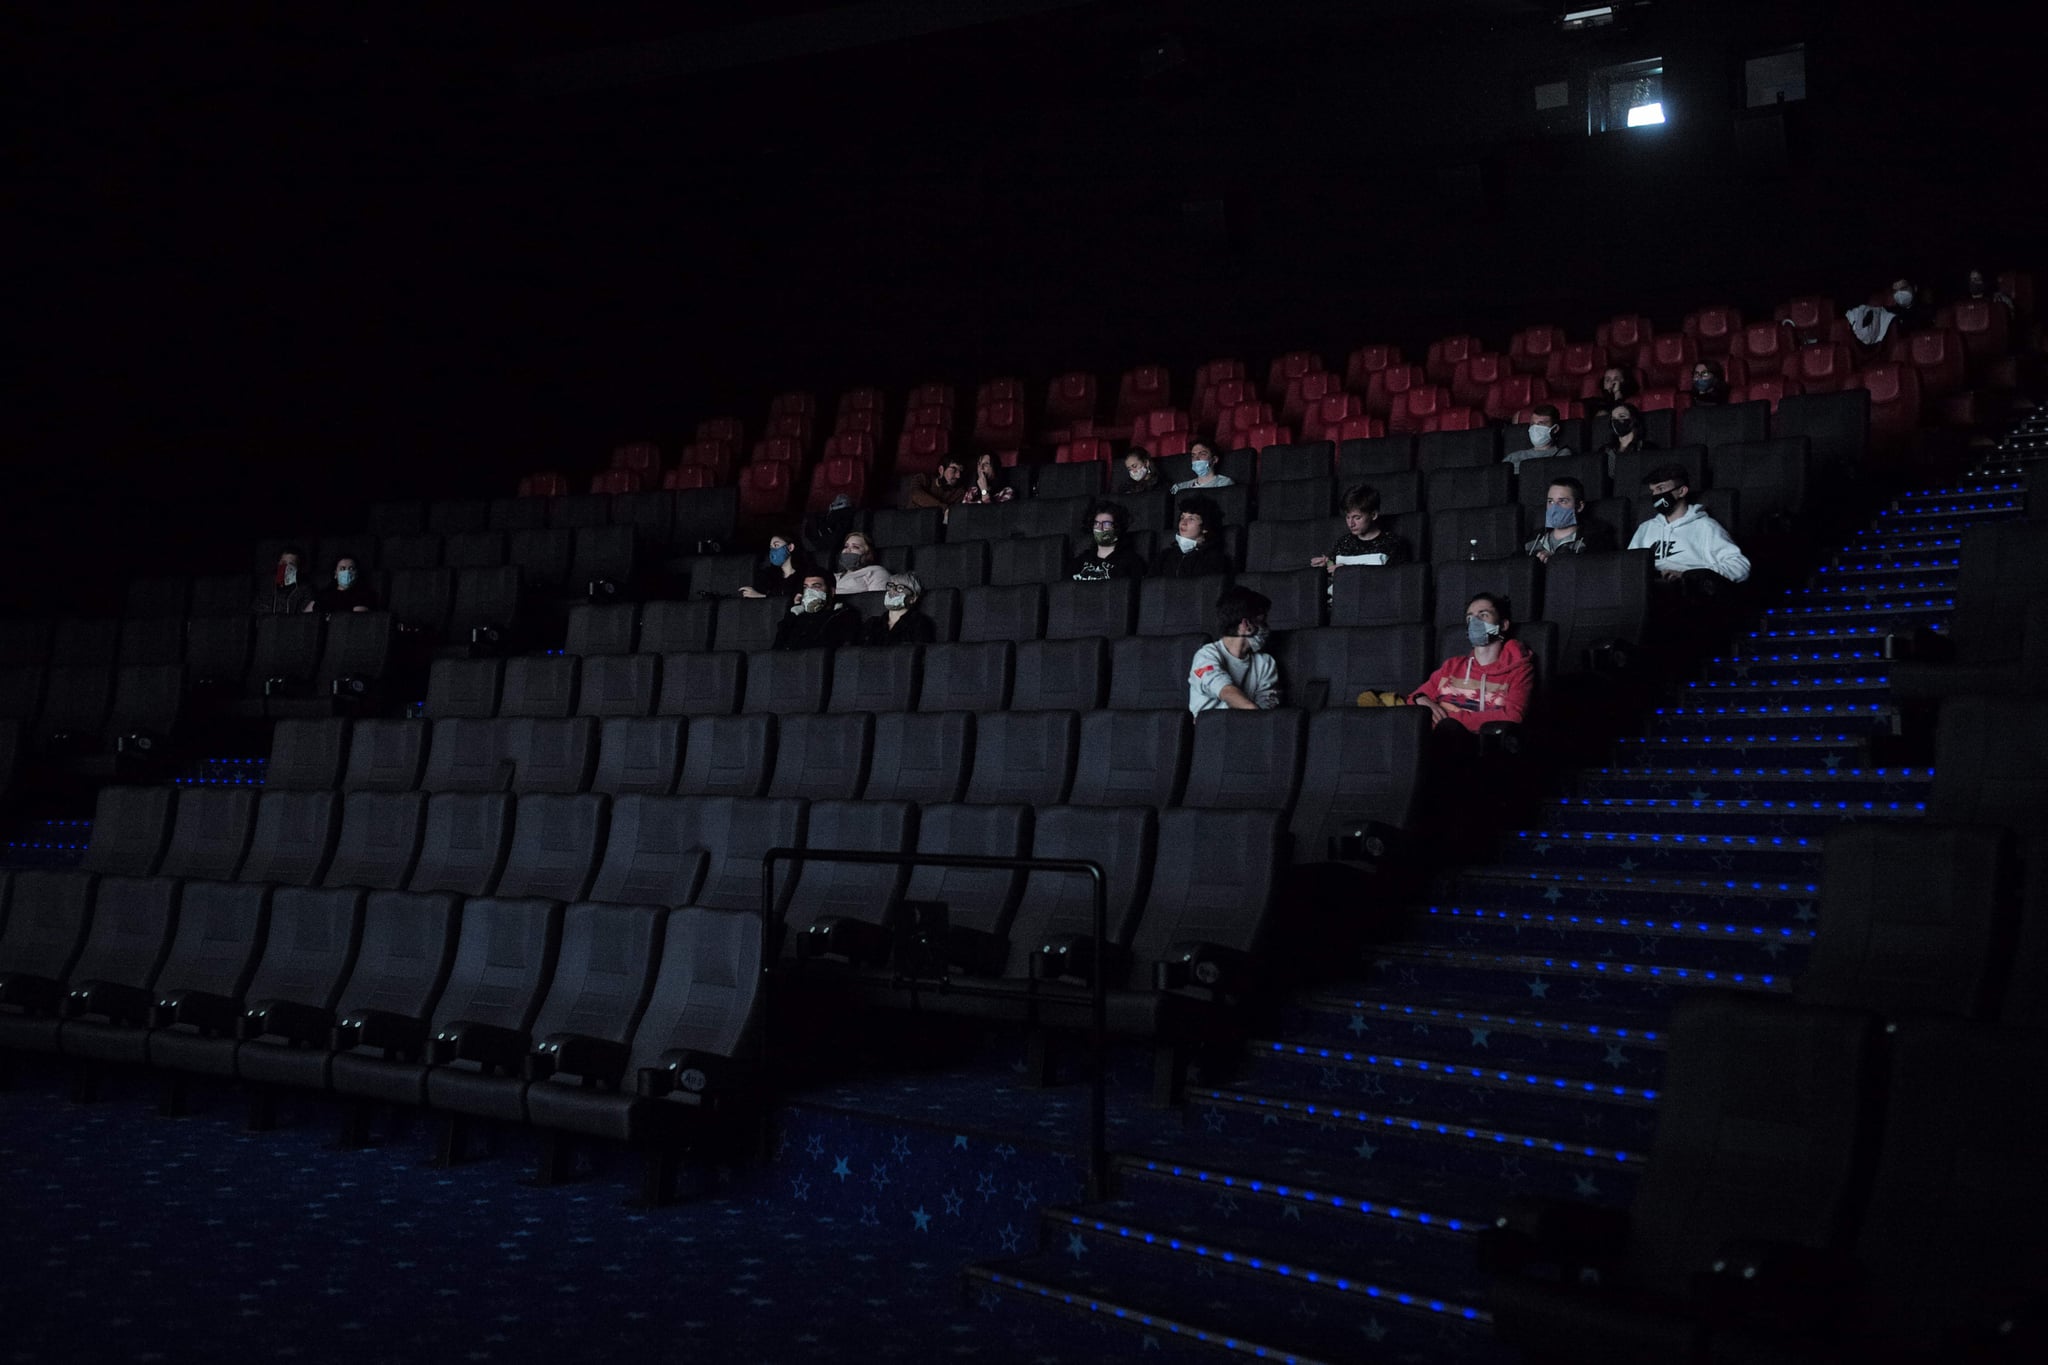 People wearing face masks watch a film in a cinema on May 11, 2020 in Prague as shopping malls, restaurant outdoor seating, hairdressers and cinemas may reopen after a two-month pause in Czech Republic as lockdown measure eases. (Photo by Michal Cizek / AFP) (Photo by MICHAL CIZEK/AFP via Getty Images)